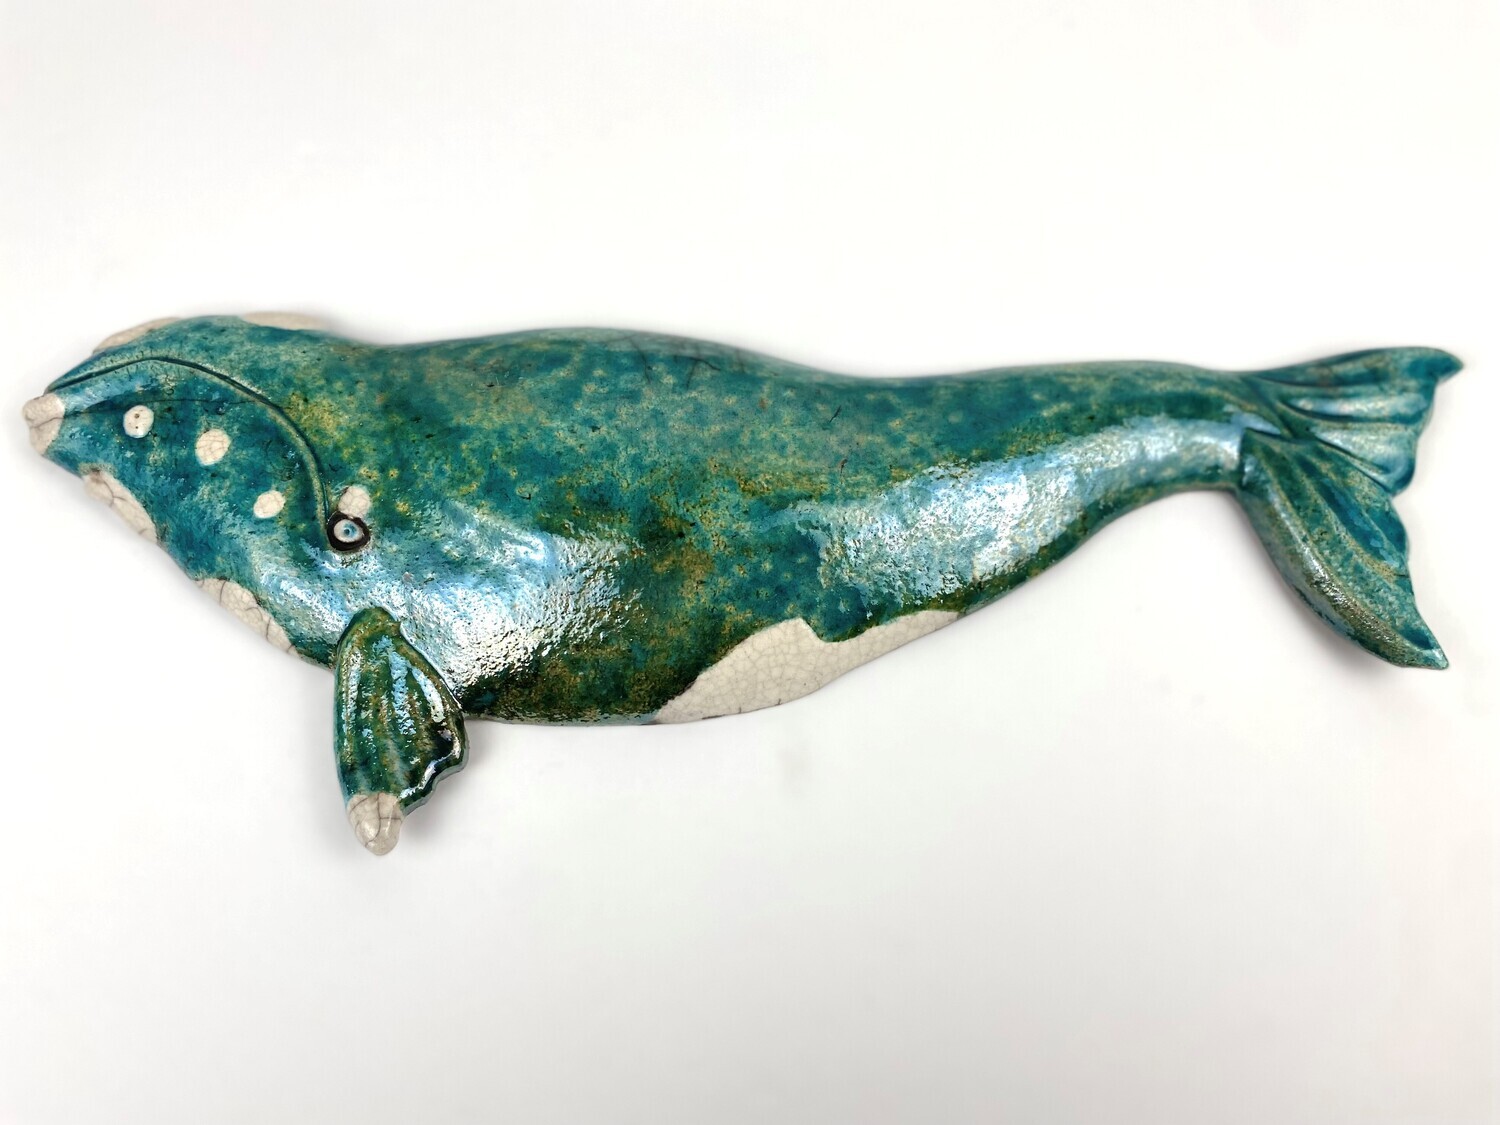 Medium/Large Right Whale Fish Wall Hanging